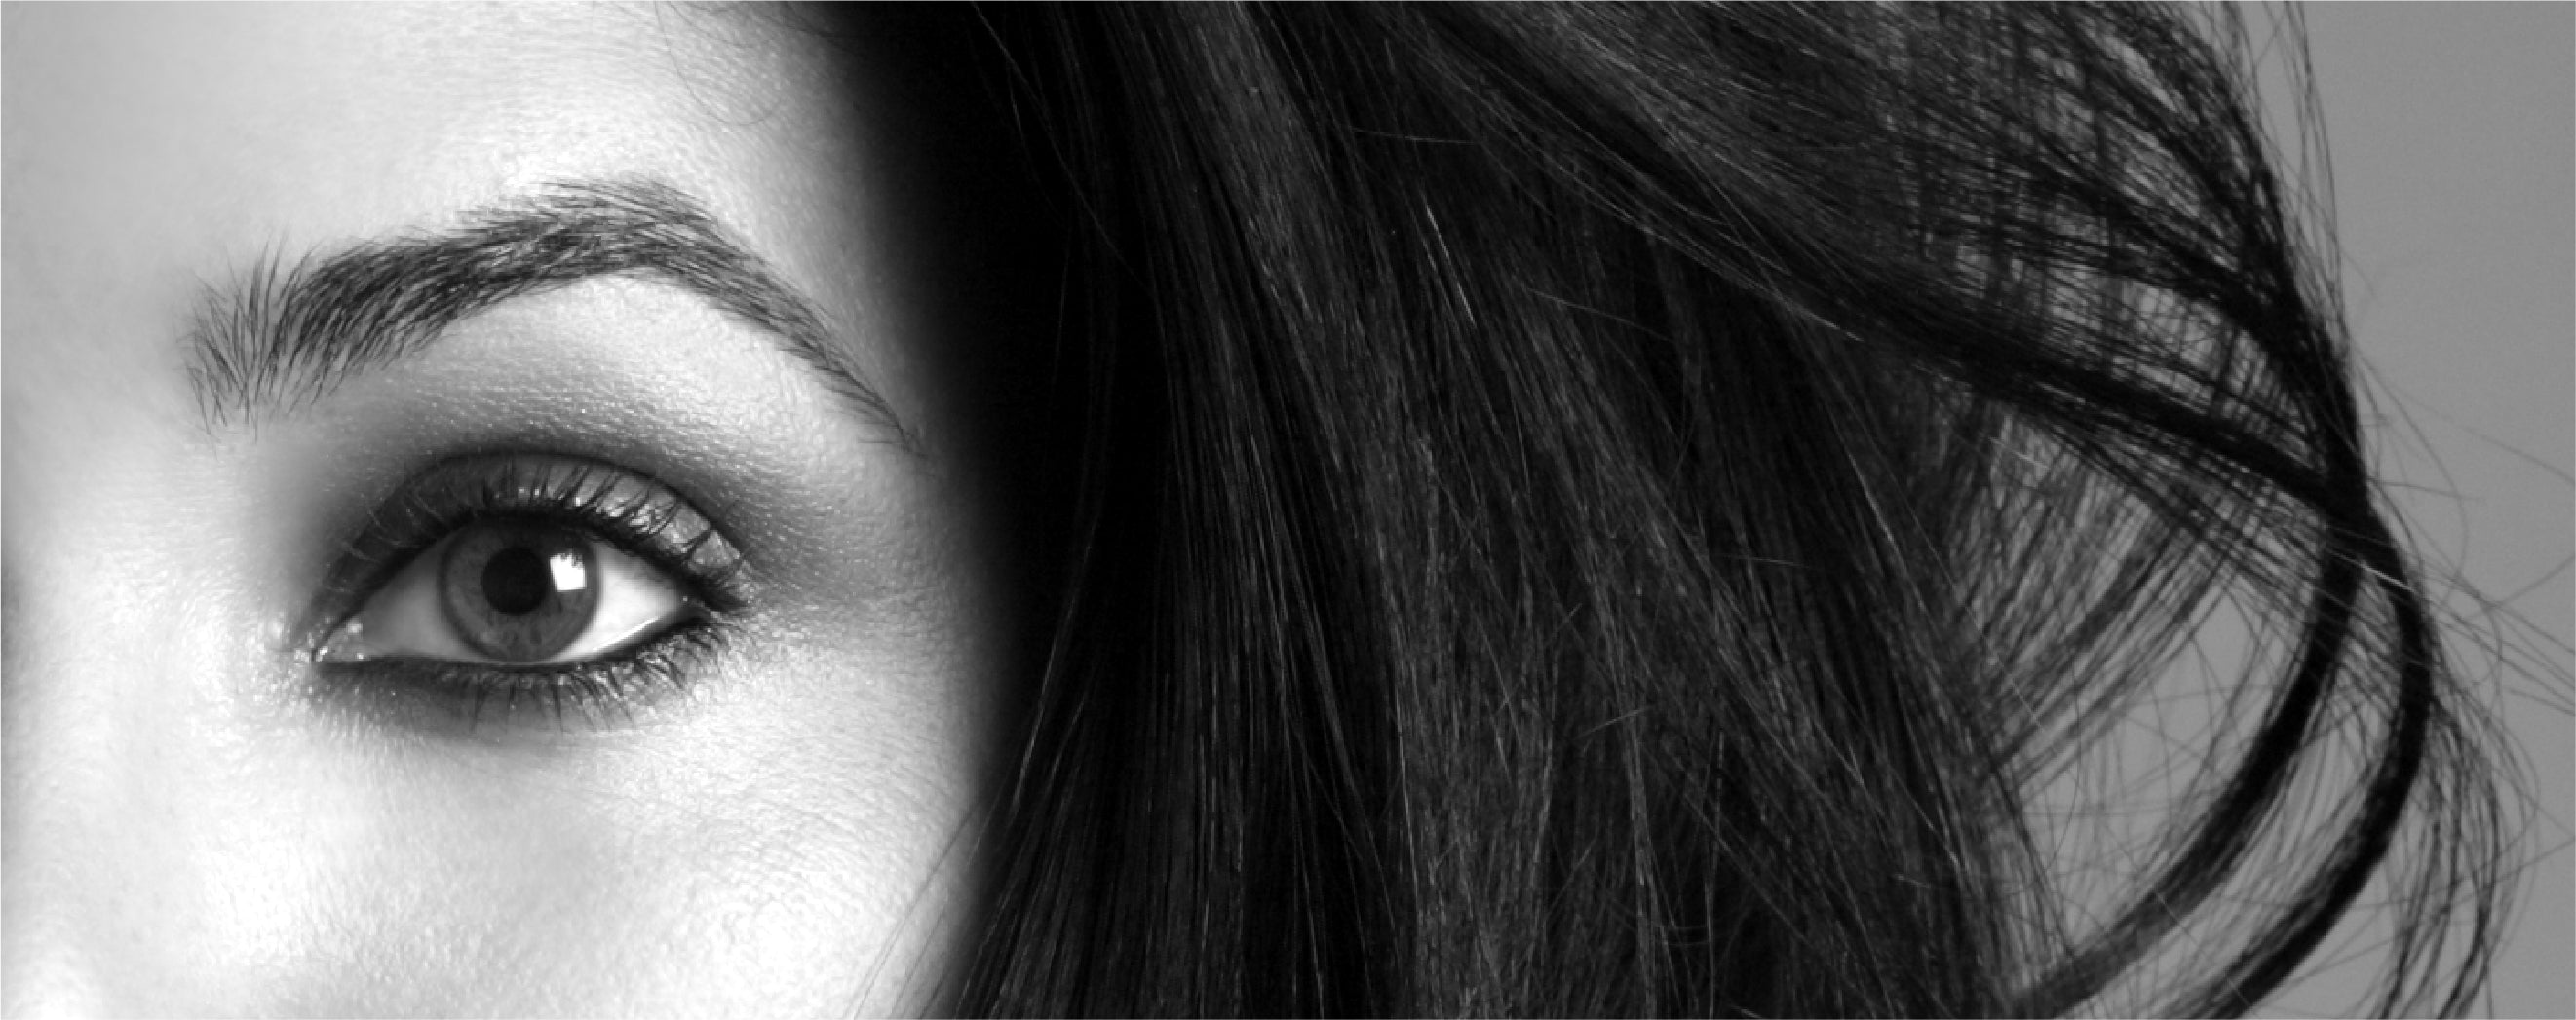 Image features a closeup of a woman's eye and shaped eyebrow.